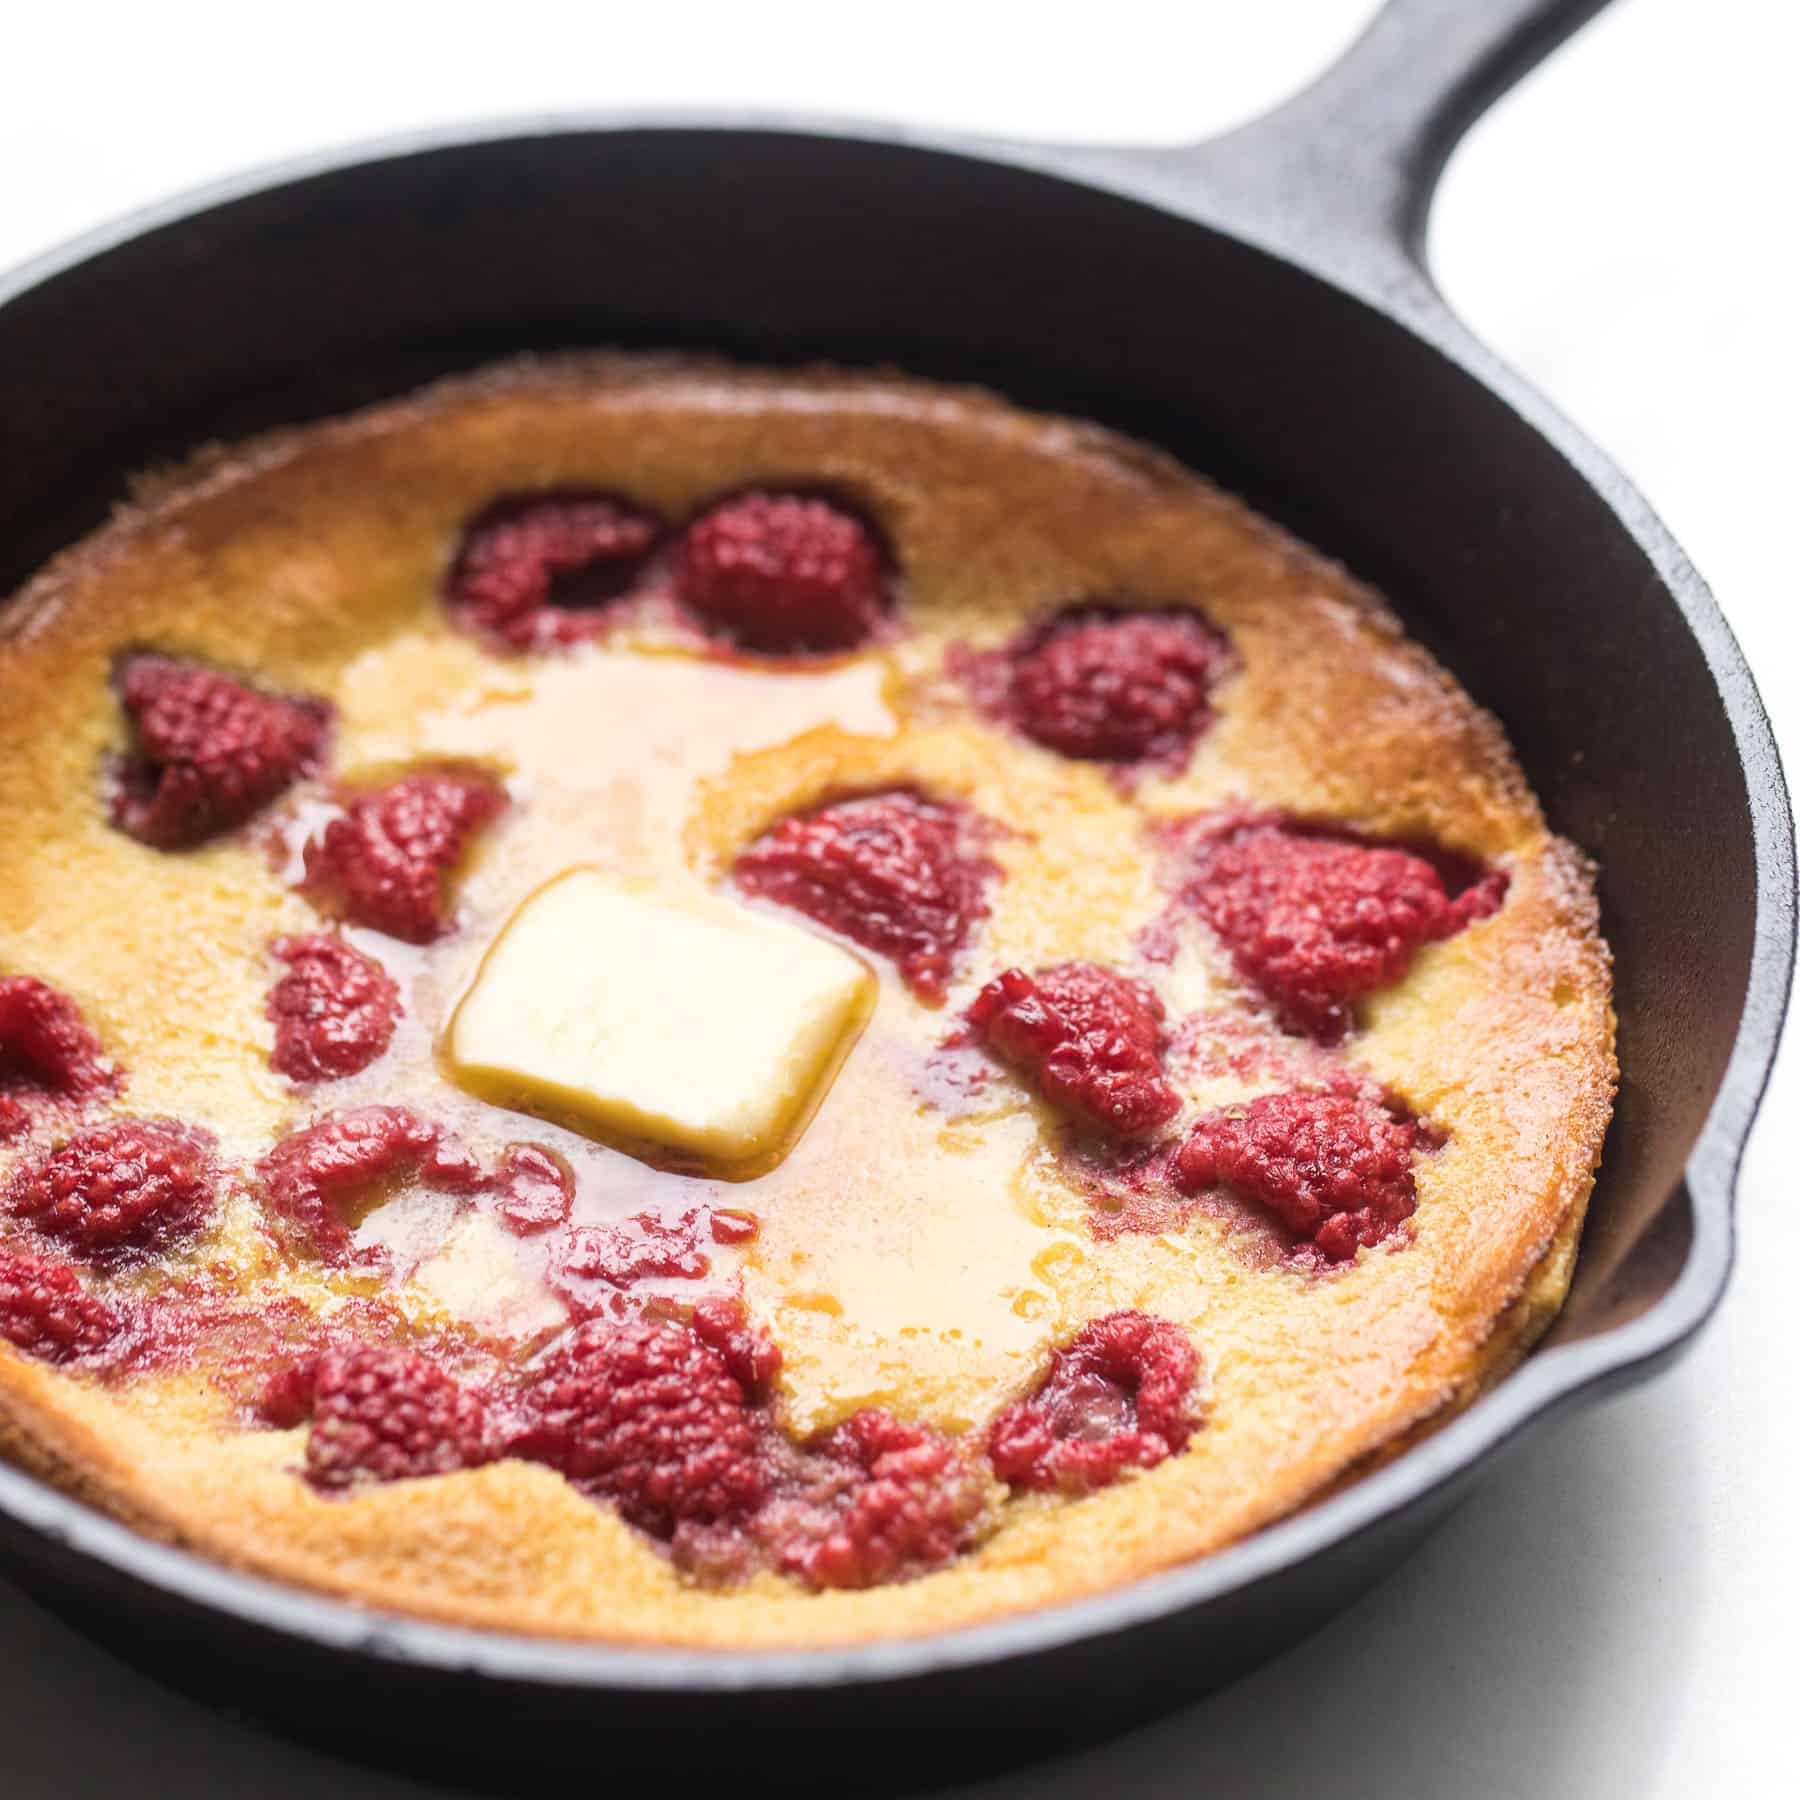 keto dutch baby pancake in a cast iron skillet with raspberries